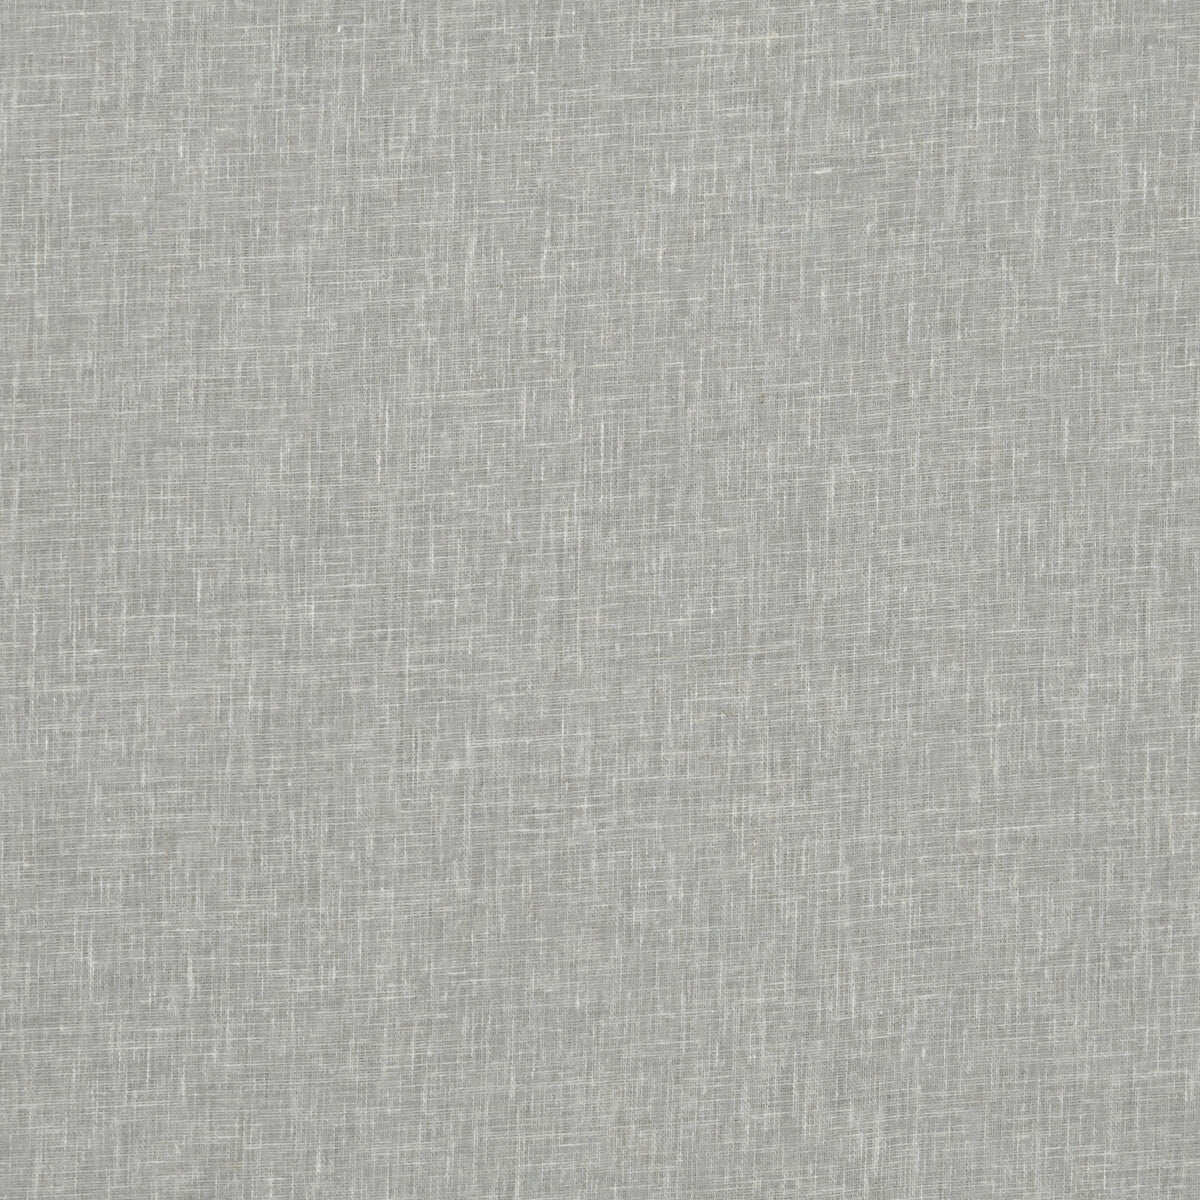 Midori fabric in slate color - pattern F1068/44.CAC.0 - by Clarke And Clarke in the Clarke &amp; Clarke Midori collection